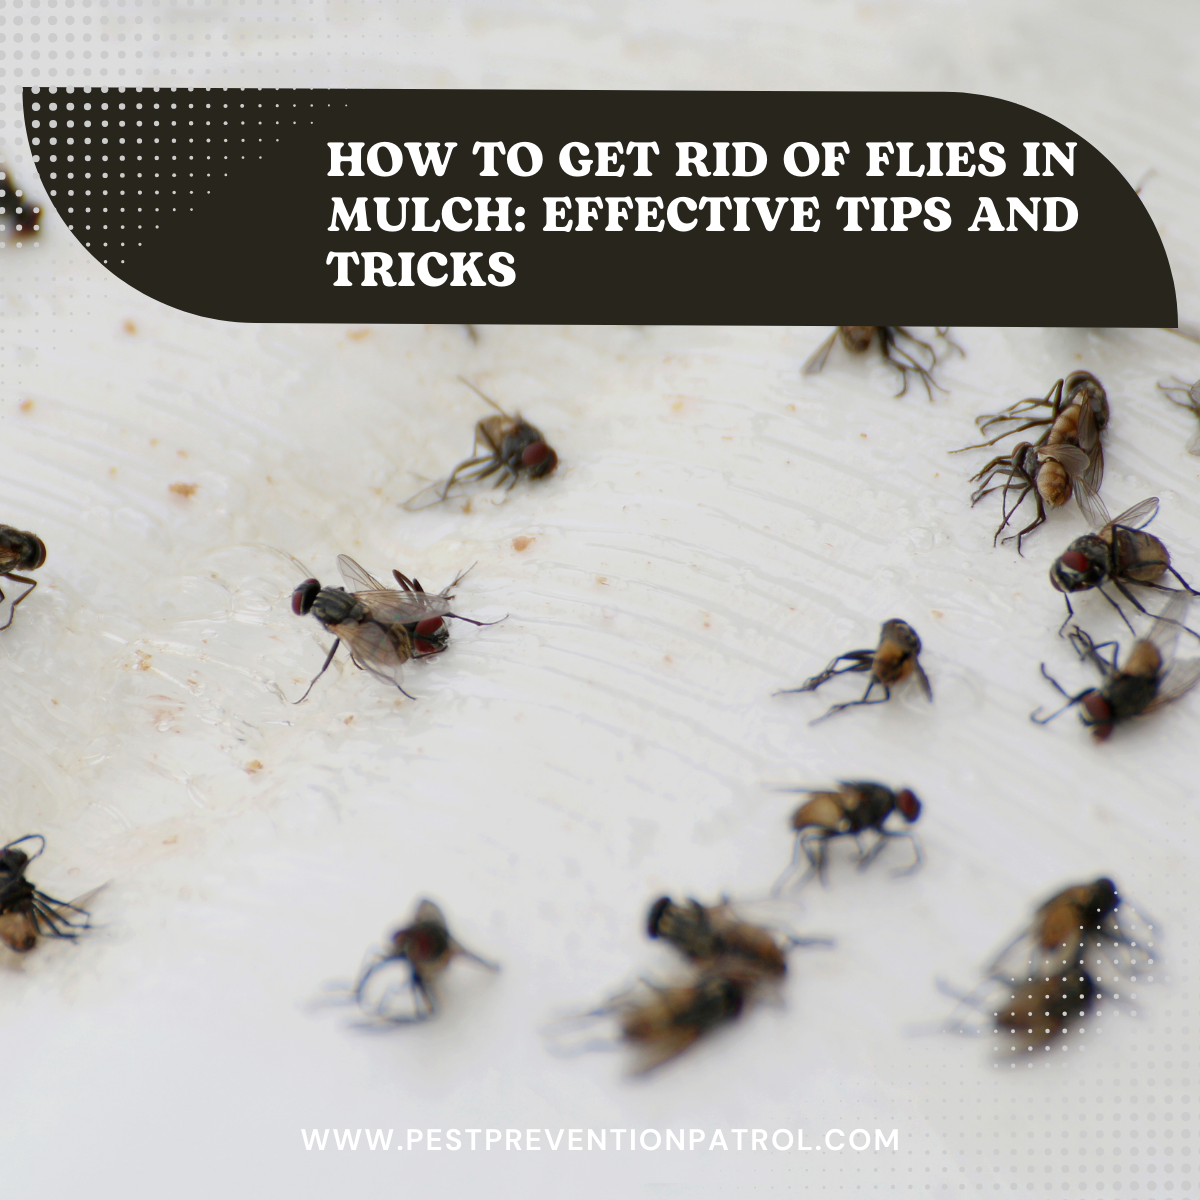 How to Get Rid of Flies in Mulch_ Effective Tips and Tricks